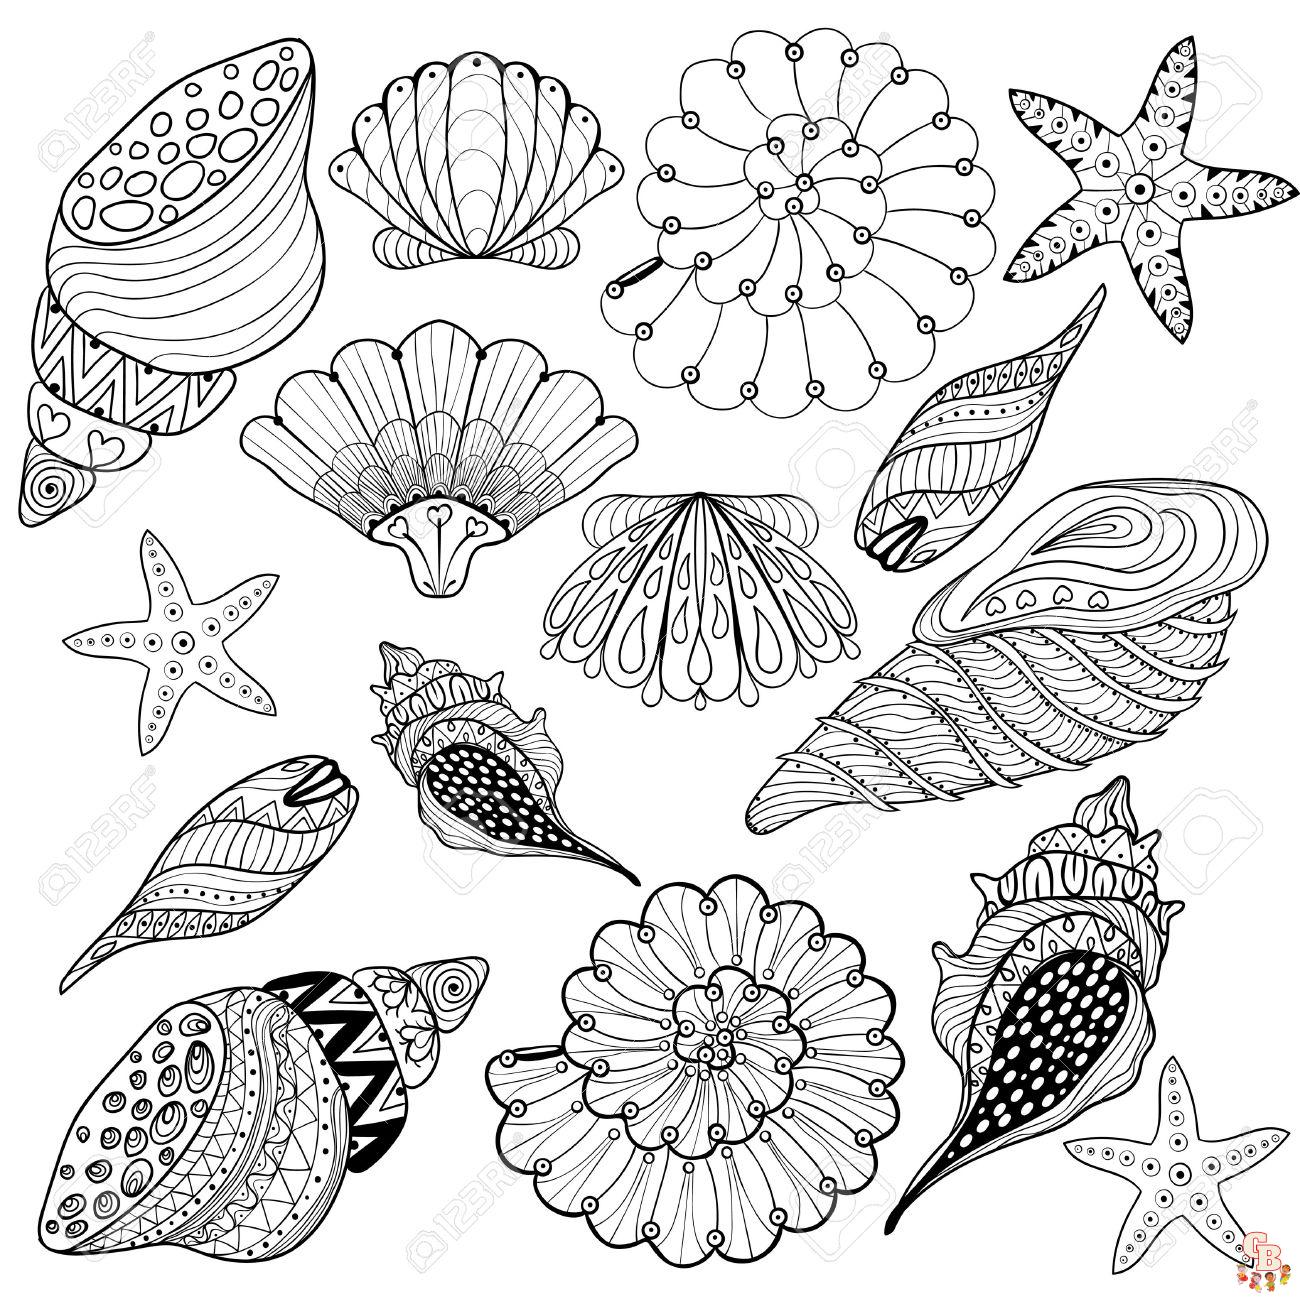 56723463 vector set shells zentangle seashells for adult anti stress coloring pages patterned sea shell